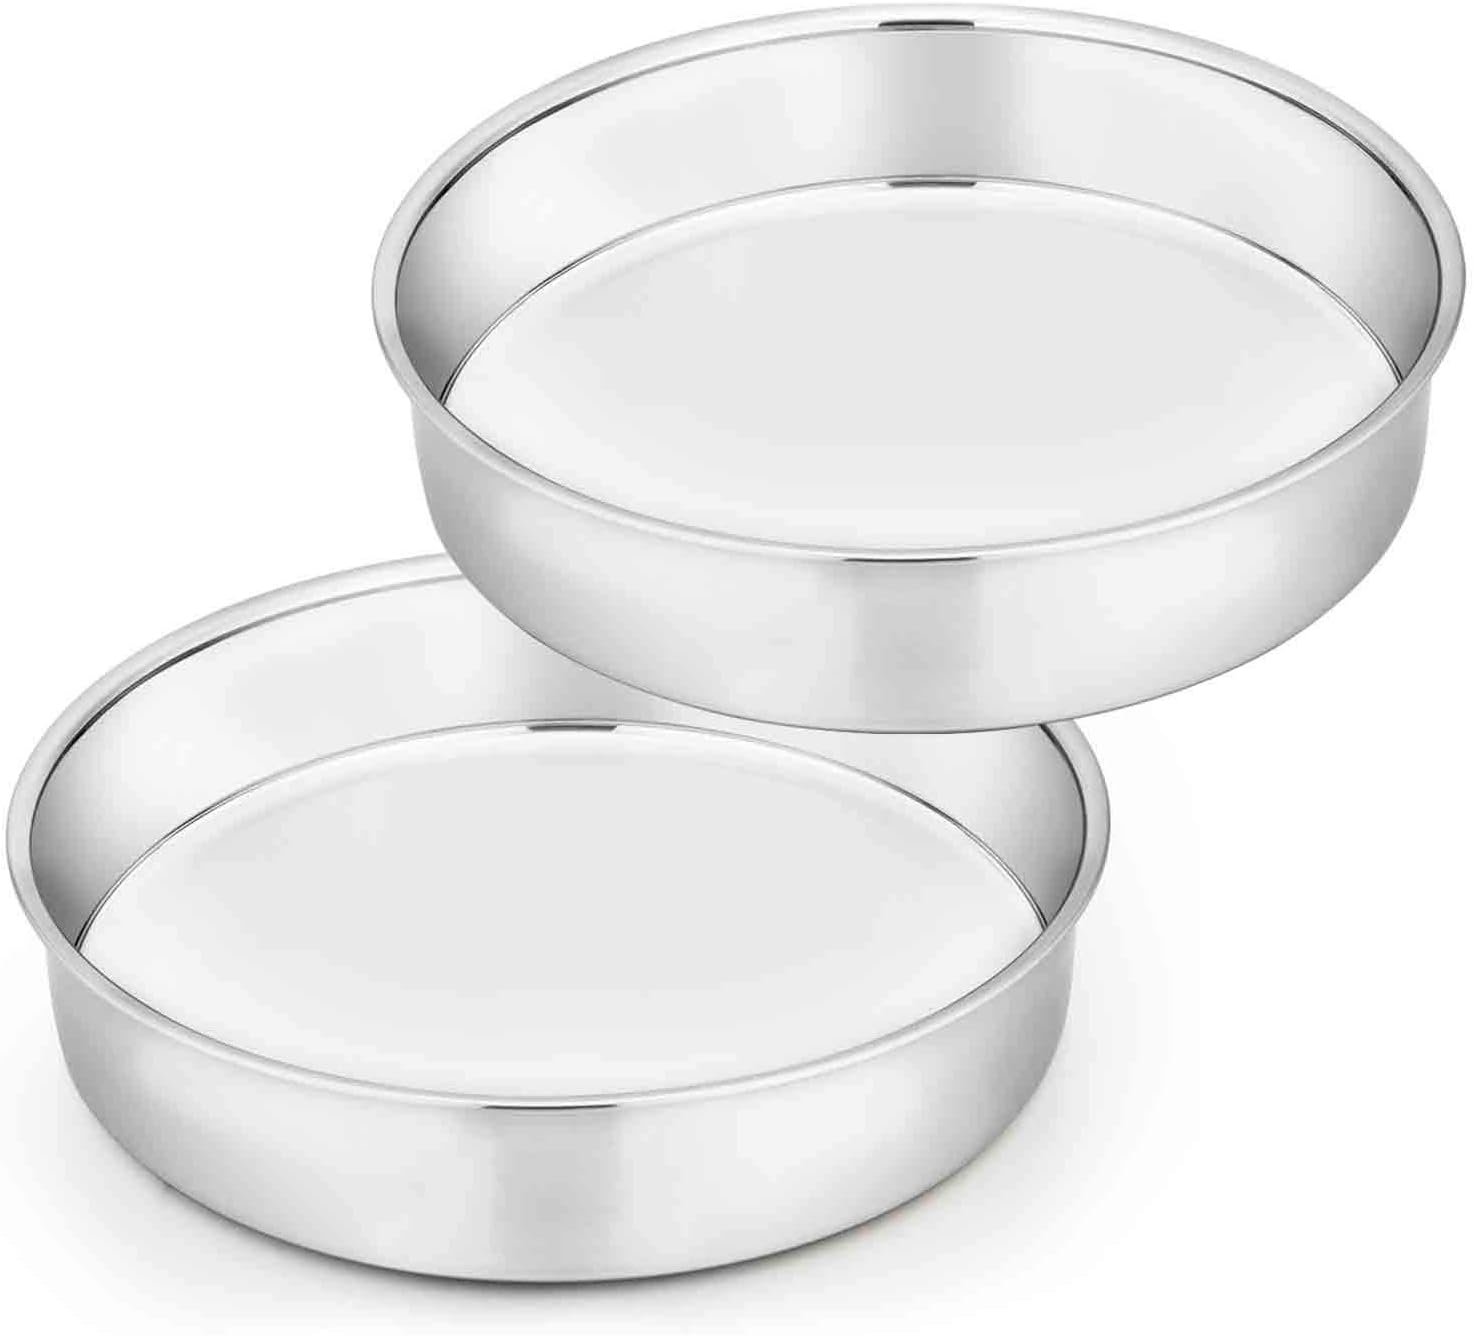 The best springform cake tins to buy 2023